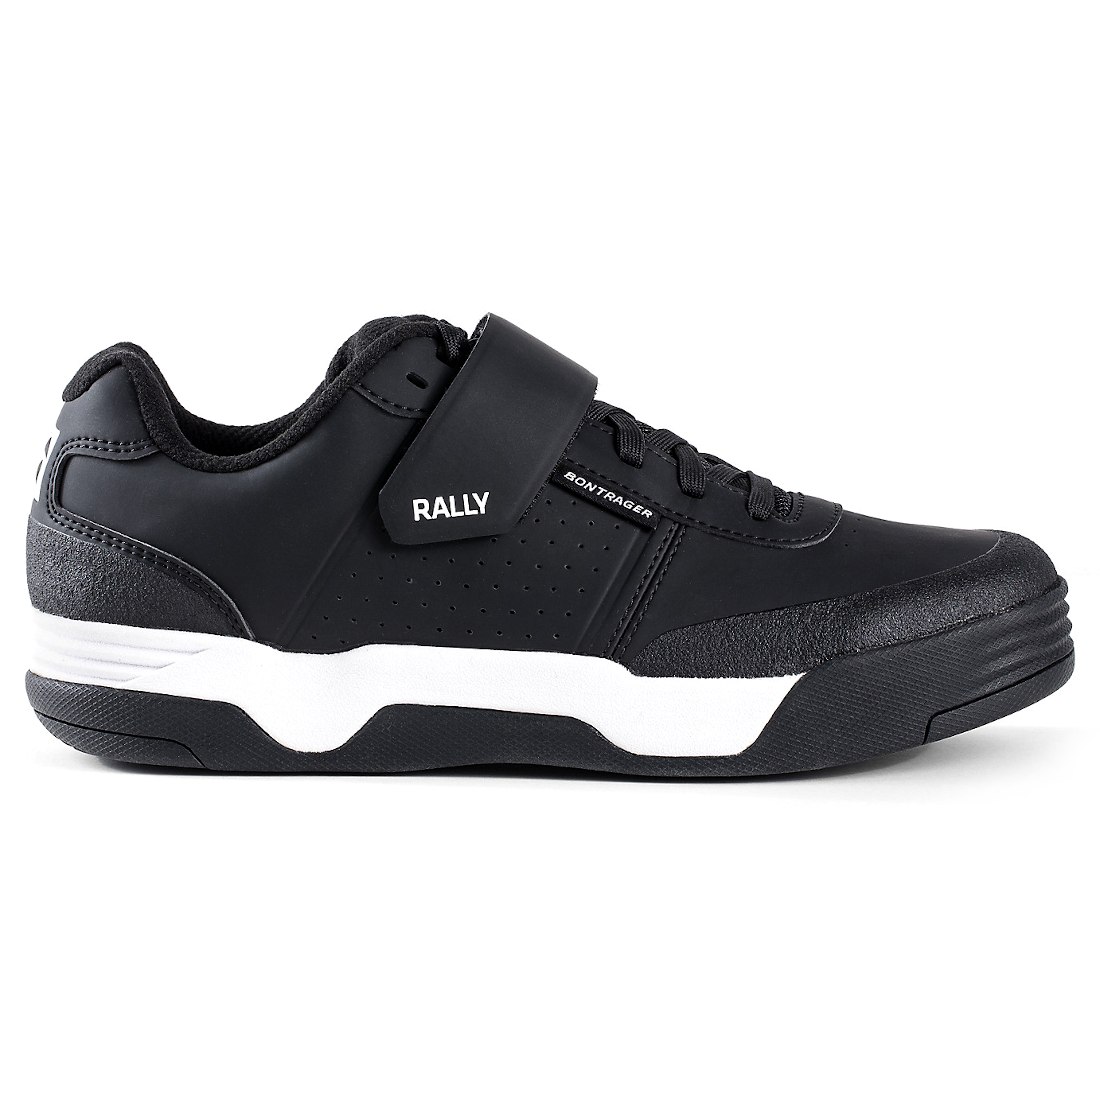 Picture of Bontrager Rally MTB Shoe - black